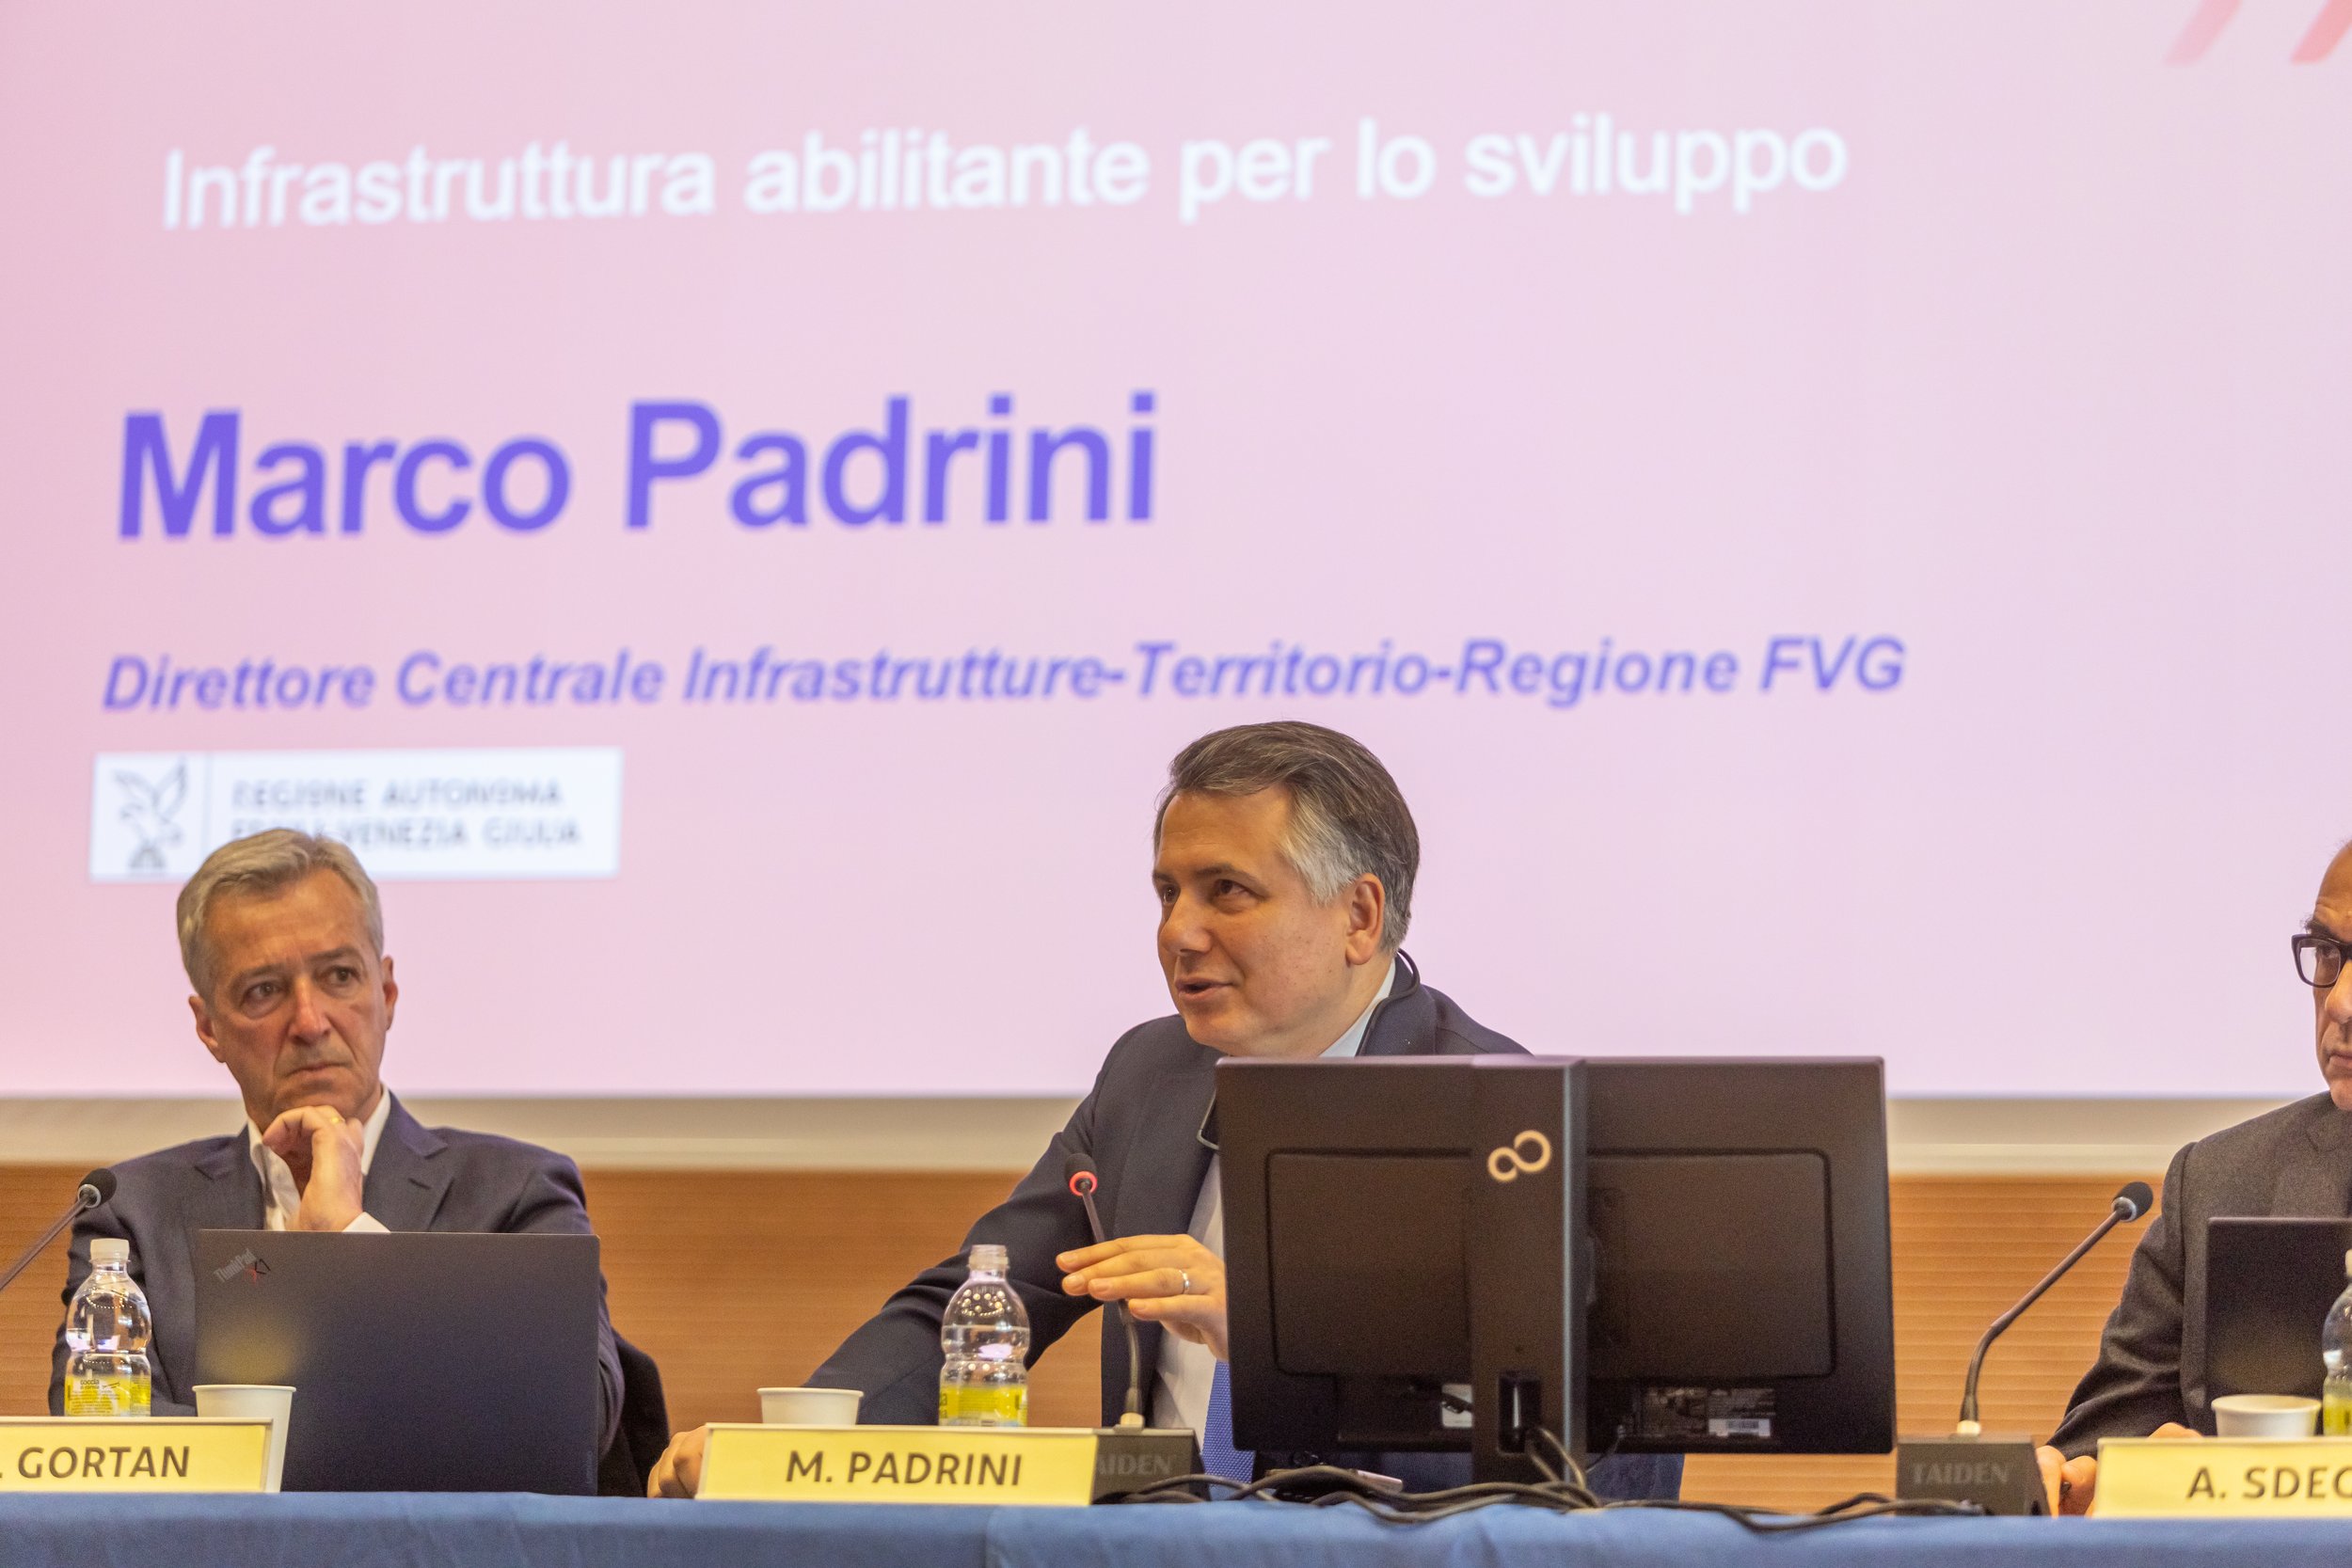  BIM@FVG seminar | Marco Padrini, Central Director Infrastructure and Territory FVG Region 